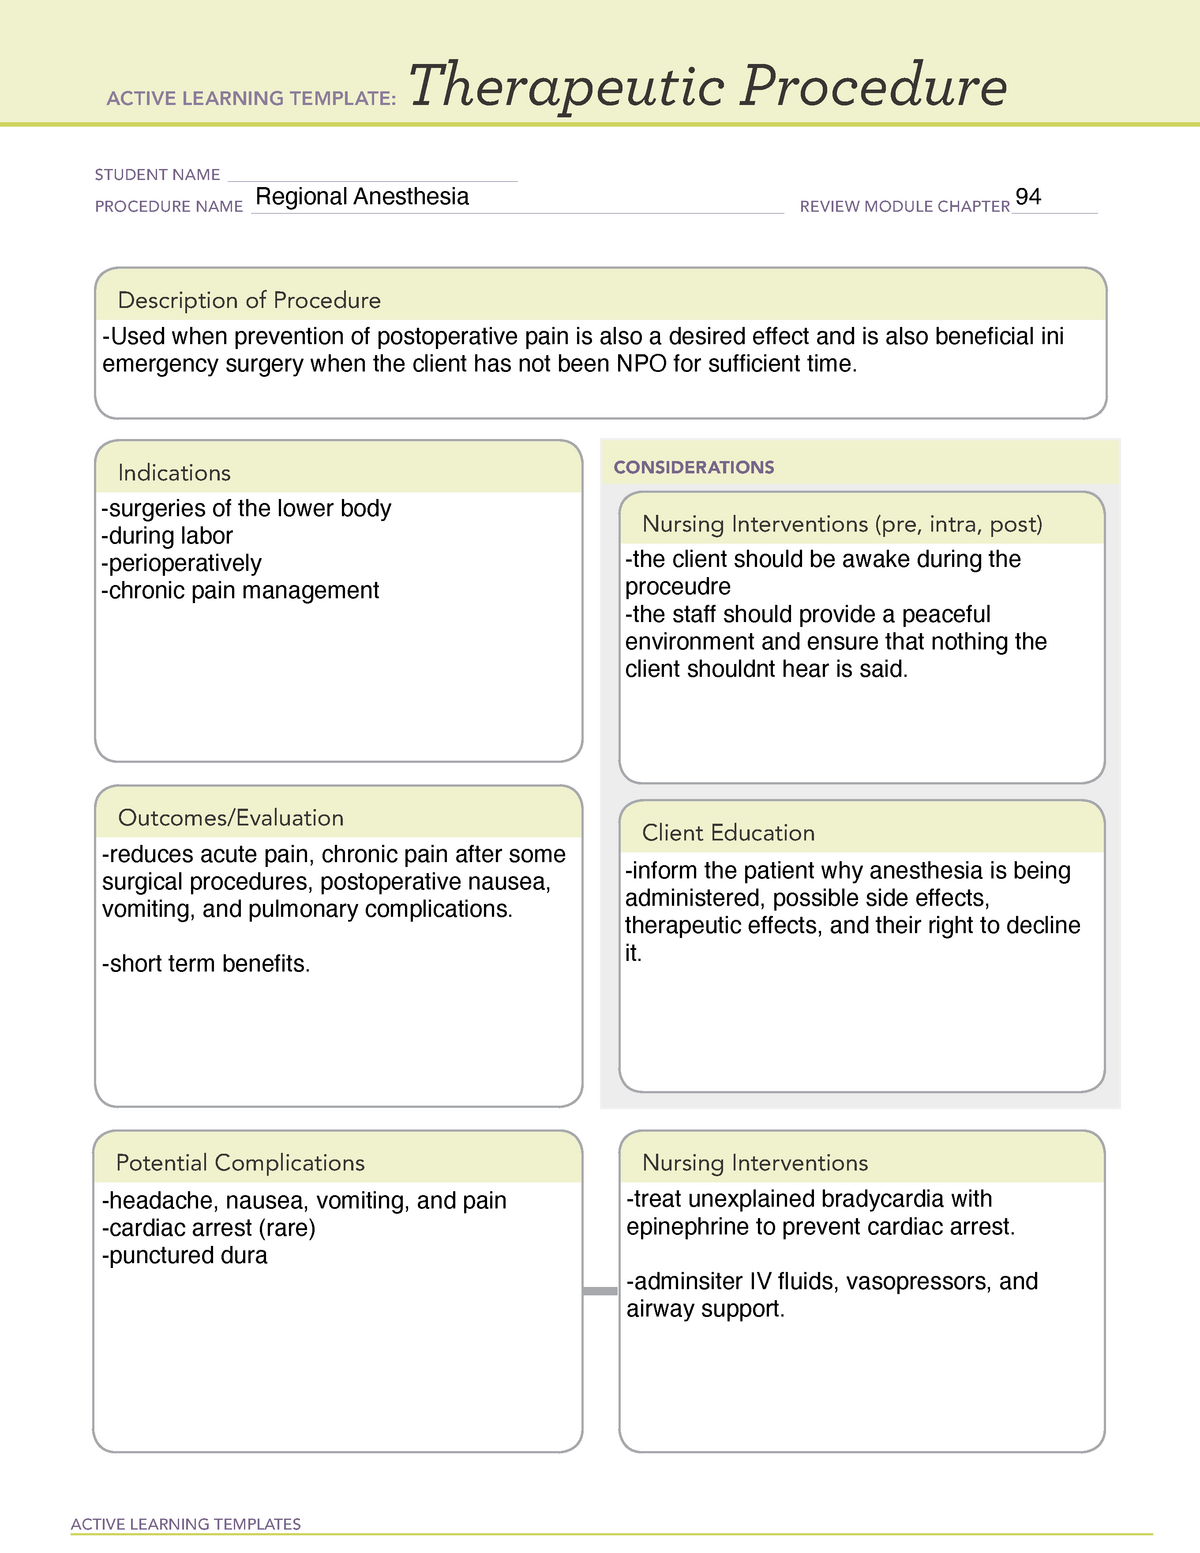 Therapeutic Procedure blank ACTIVE LEARNING TEMPLATES Therapeutic